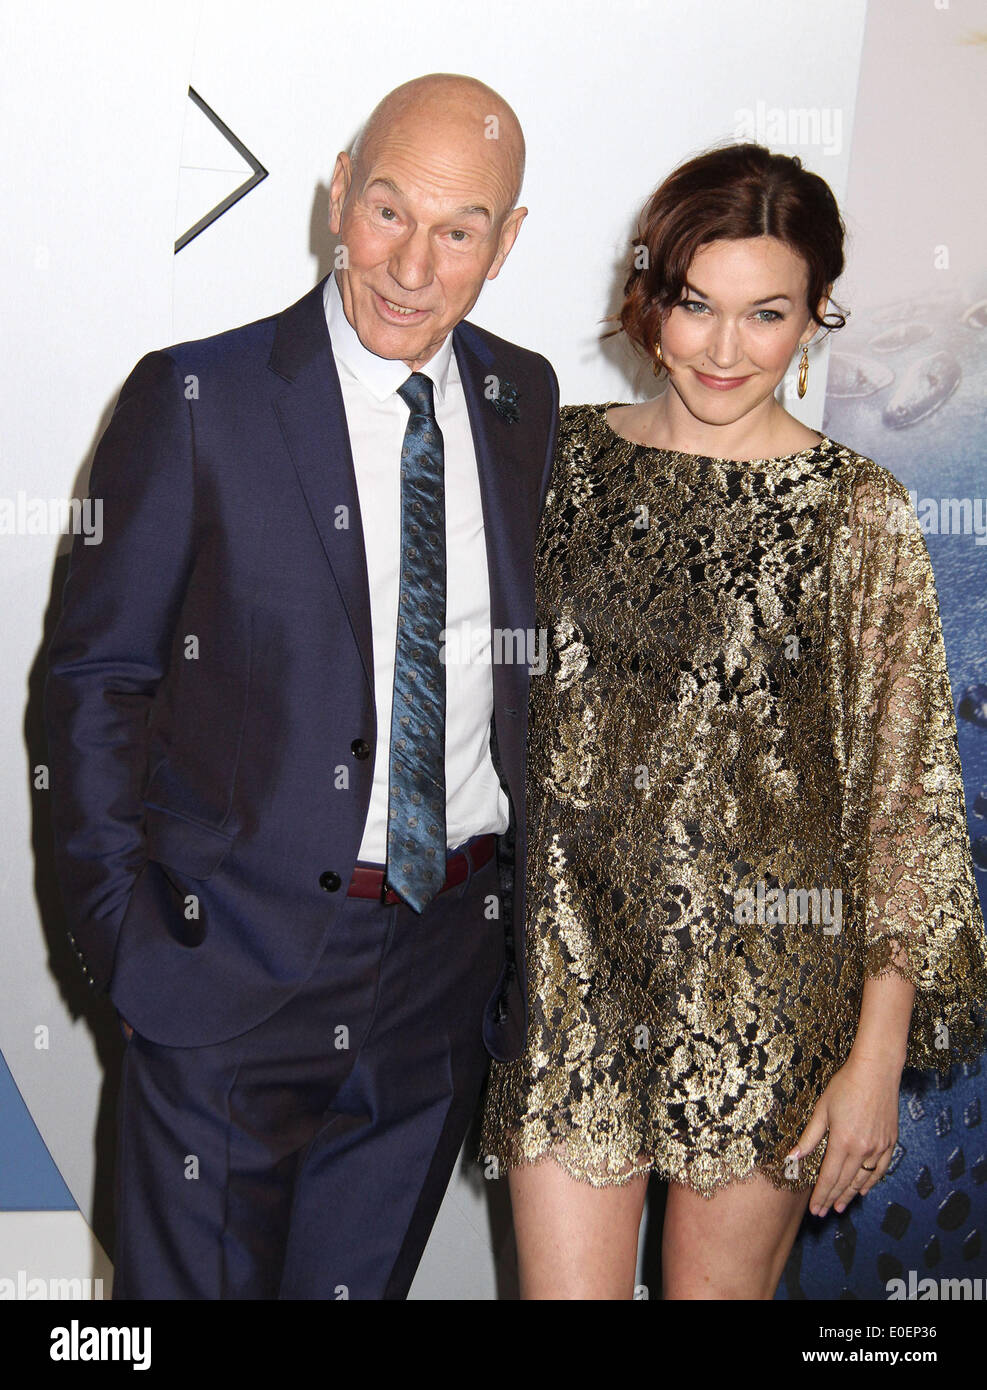 New York, New York, USA. 10th May, 2014. Actor PATRICK STEWART and his daughter SOPHIE ALEXANDRA STEWART attend the global premiere of 'X-Men: Days of Future Past' held Jacob Javits Convention Center. Credit:  Nancy Kaszerman/ZUMAPRESS.com/Alamy Live News Stock Photo